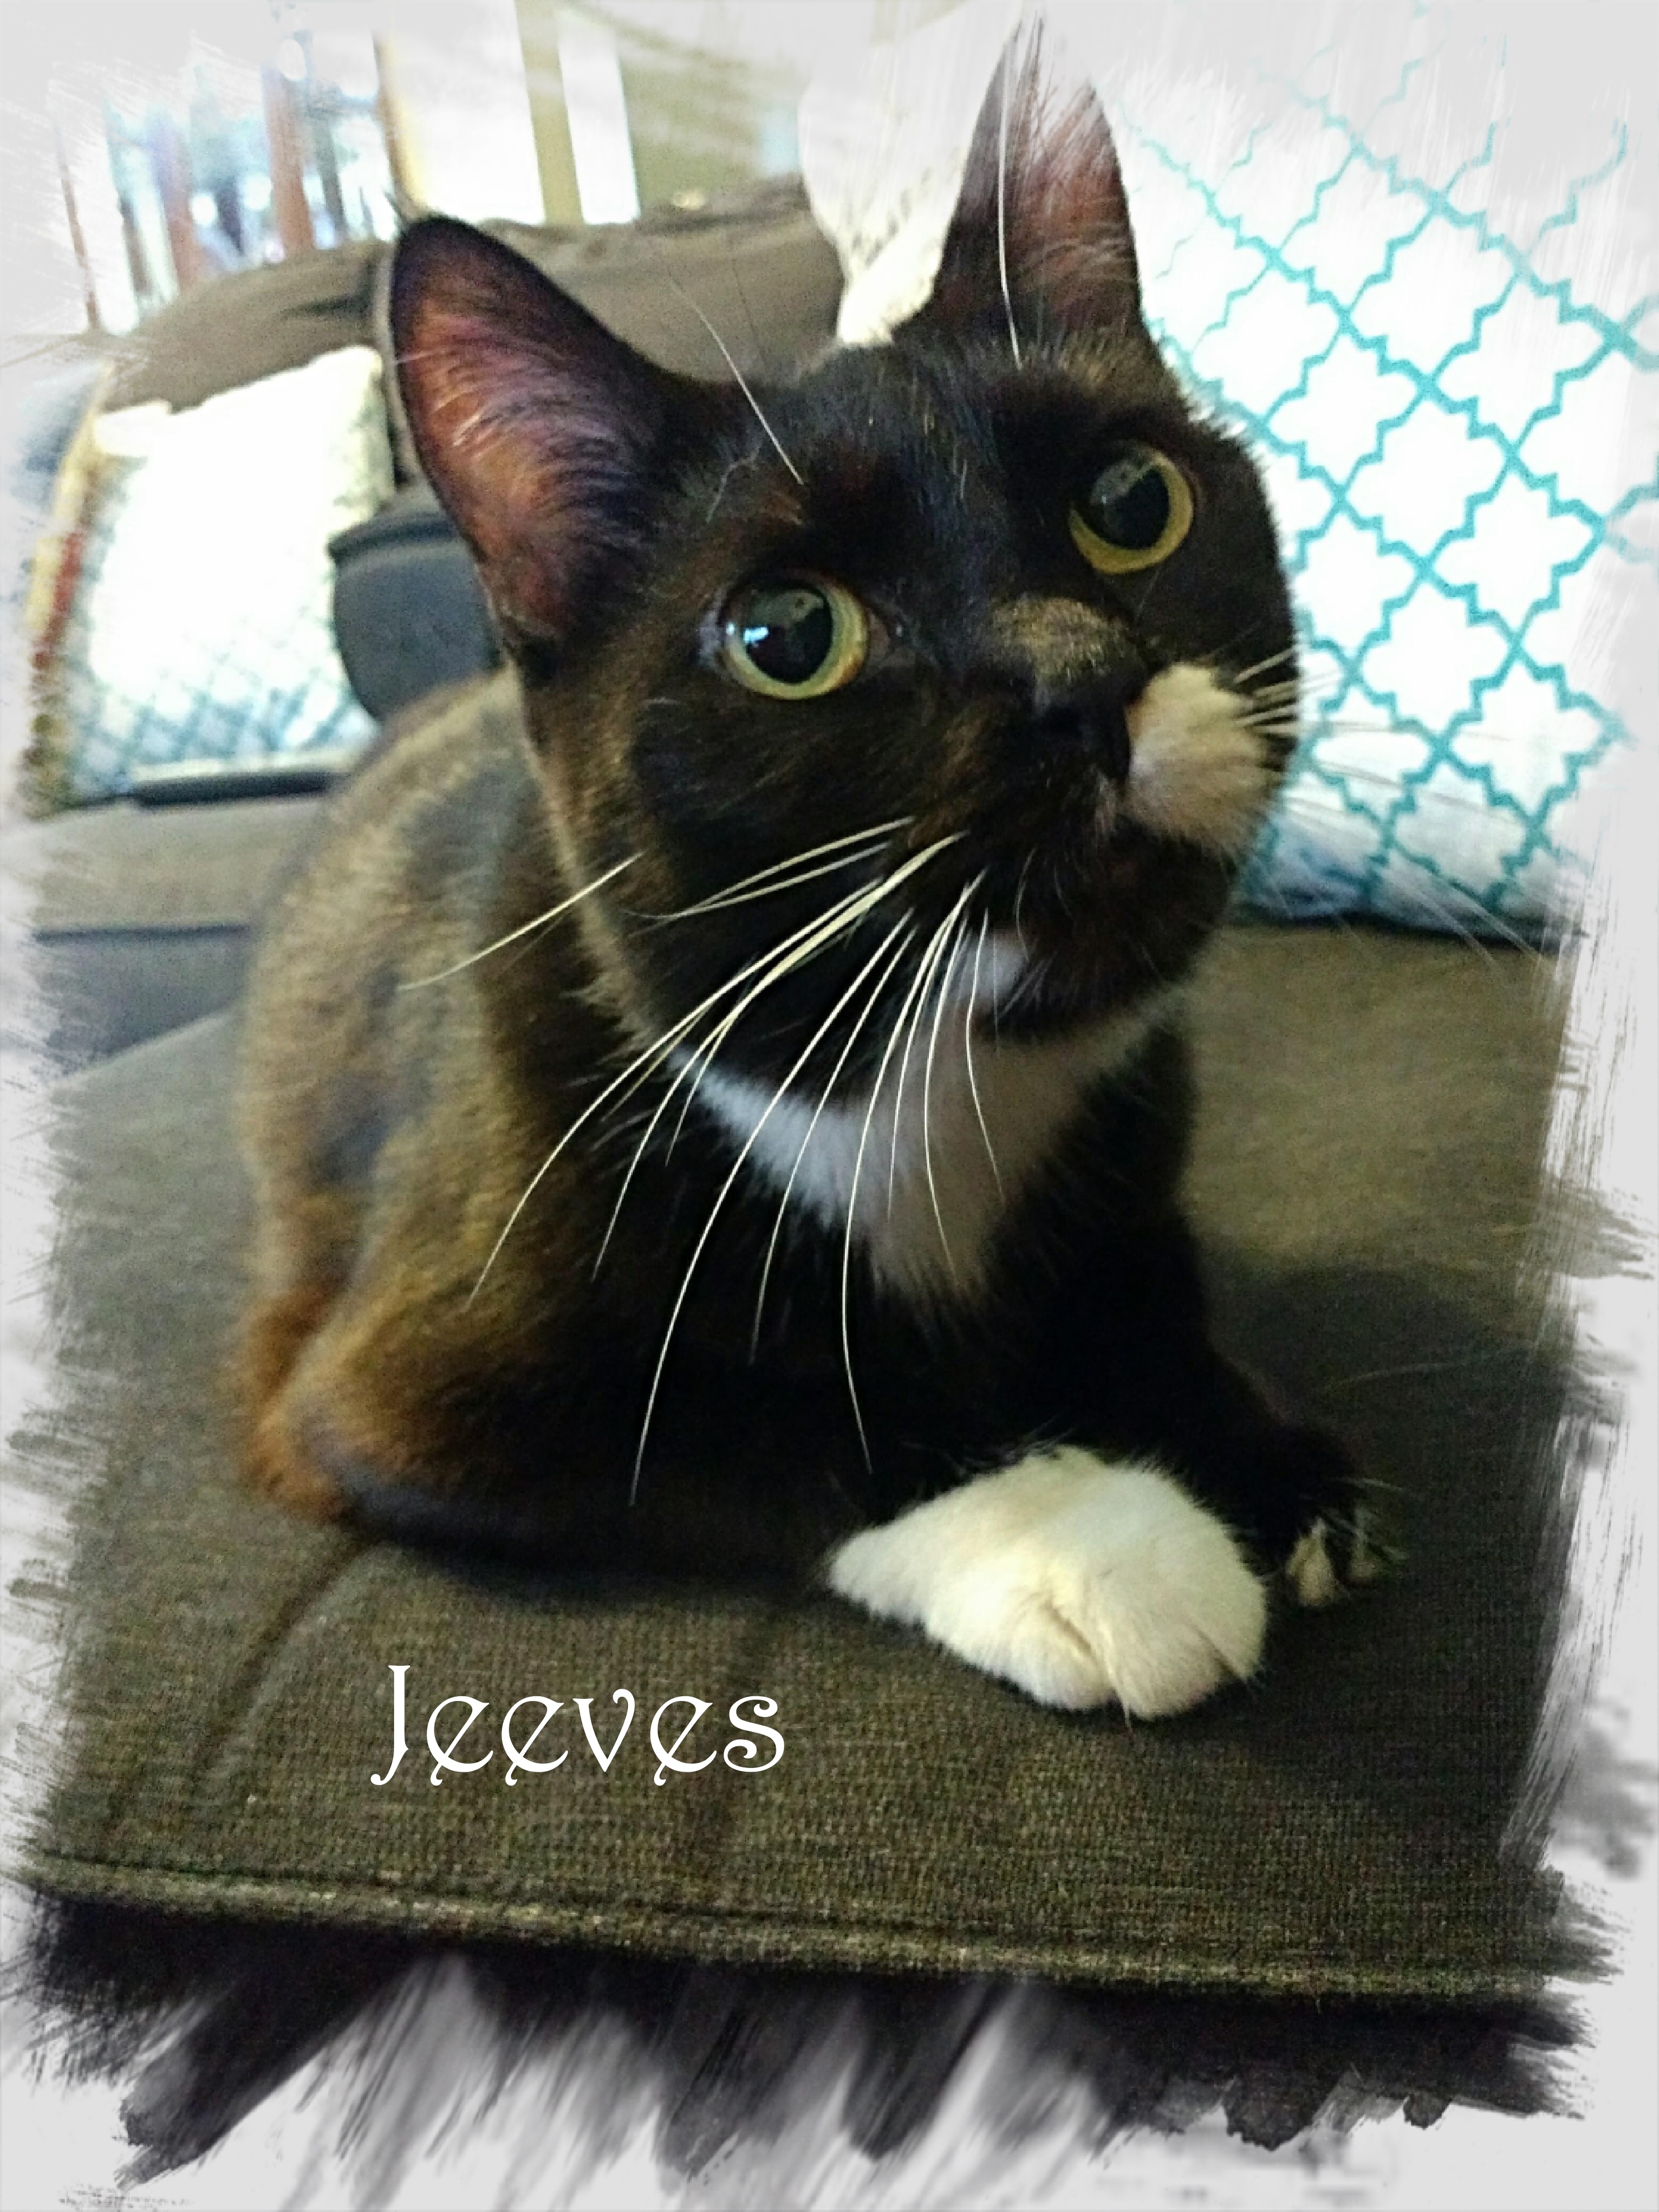 Jeeves detail page